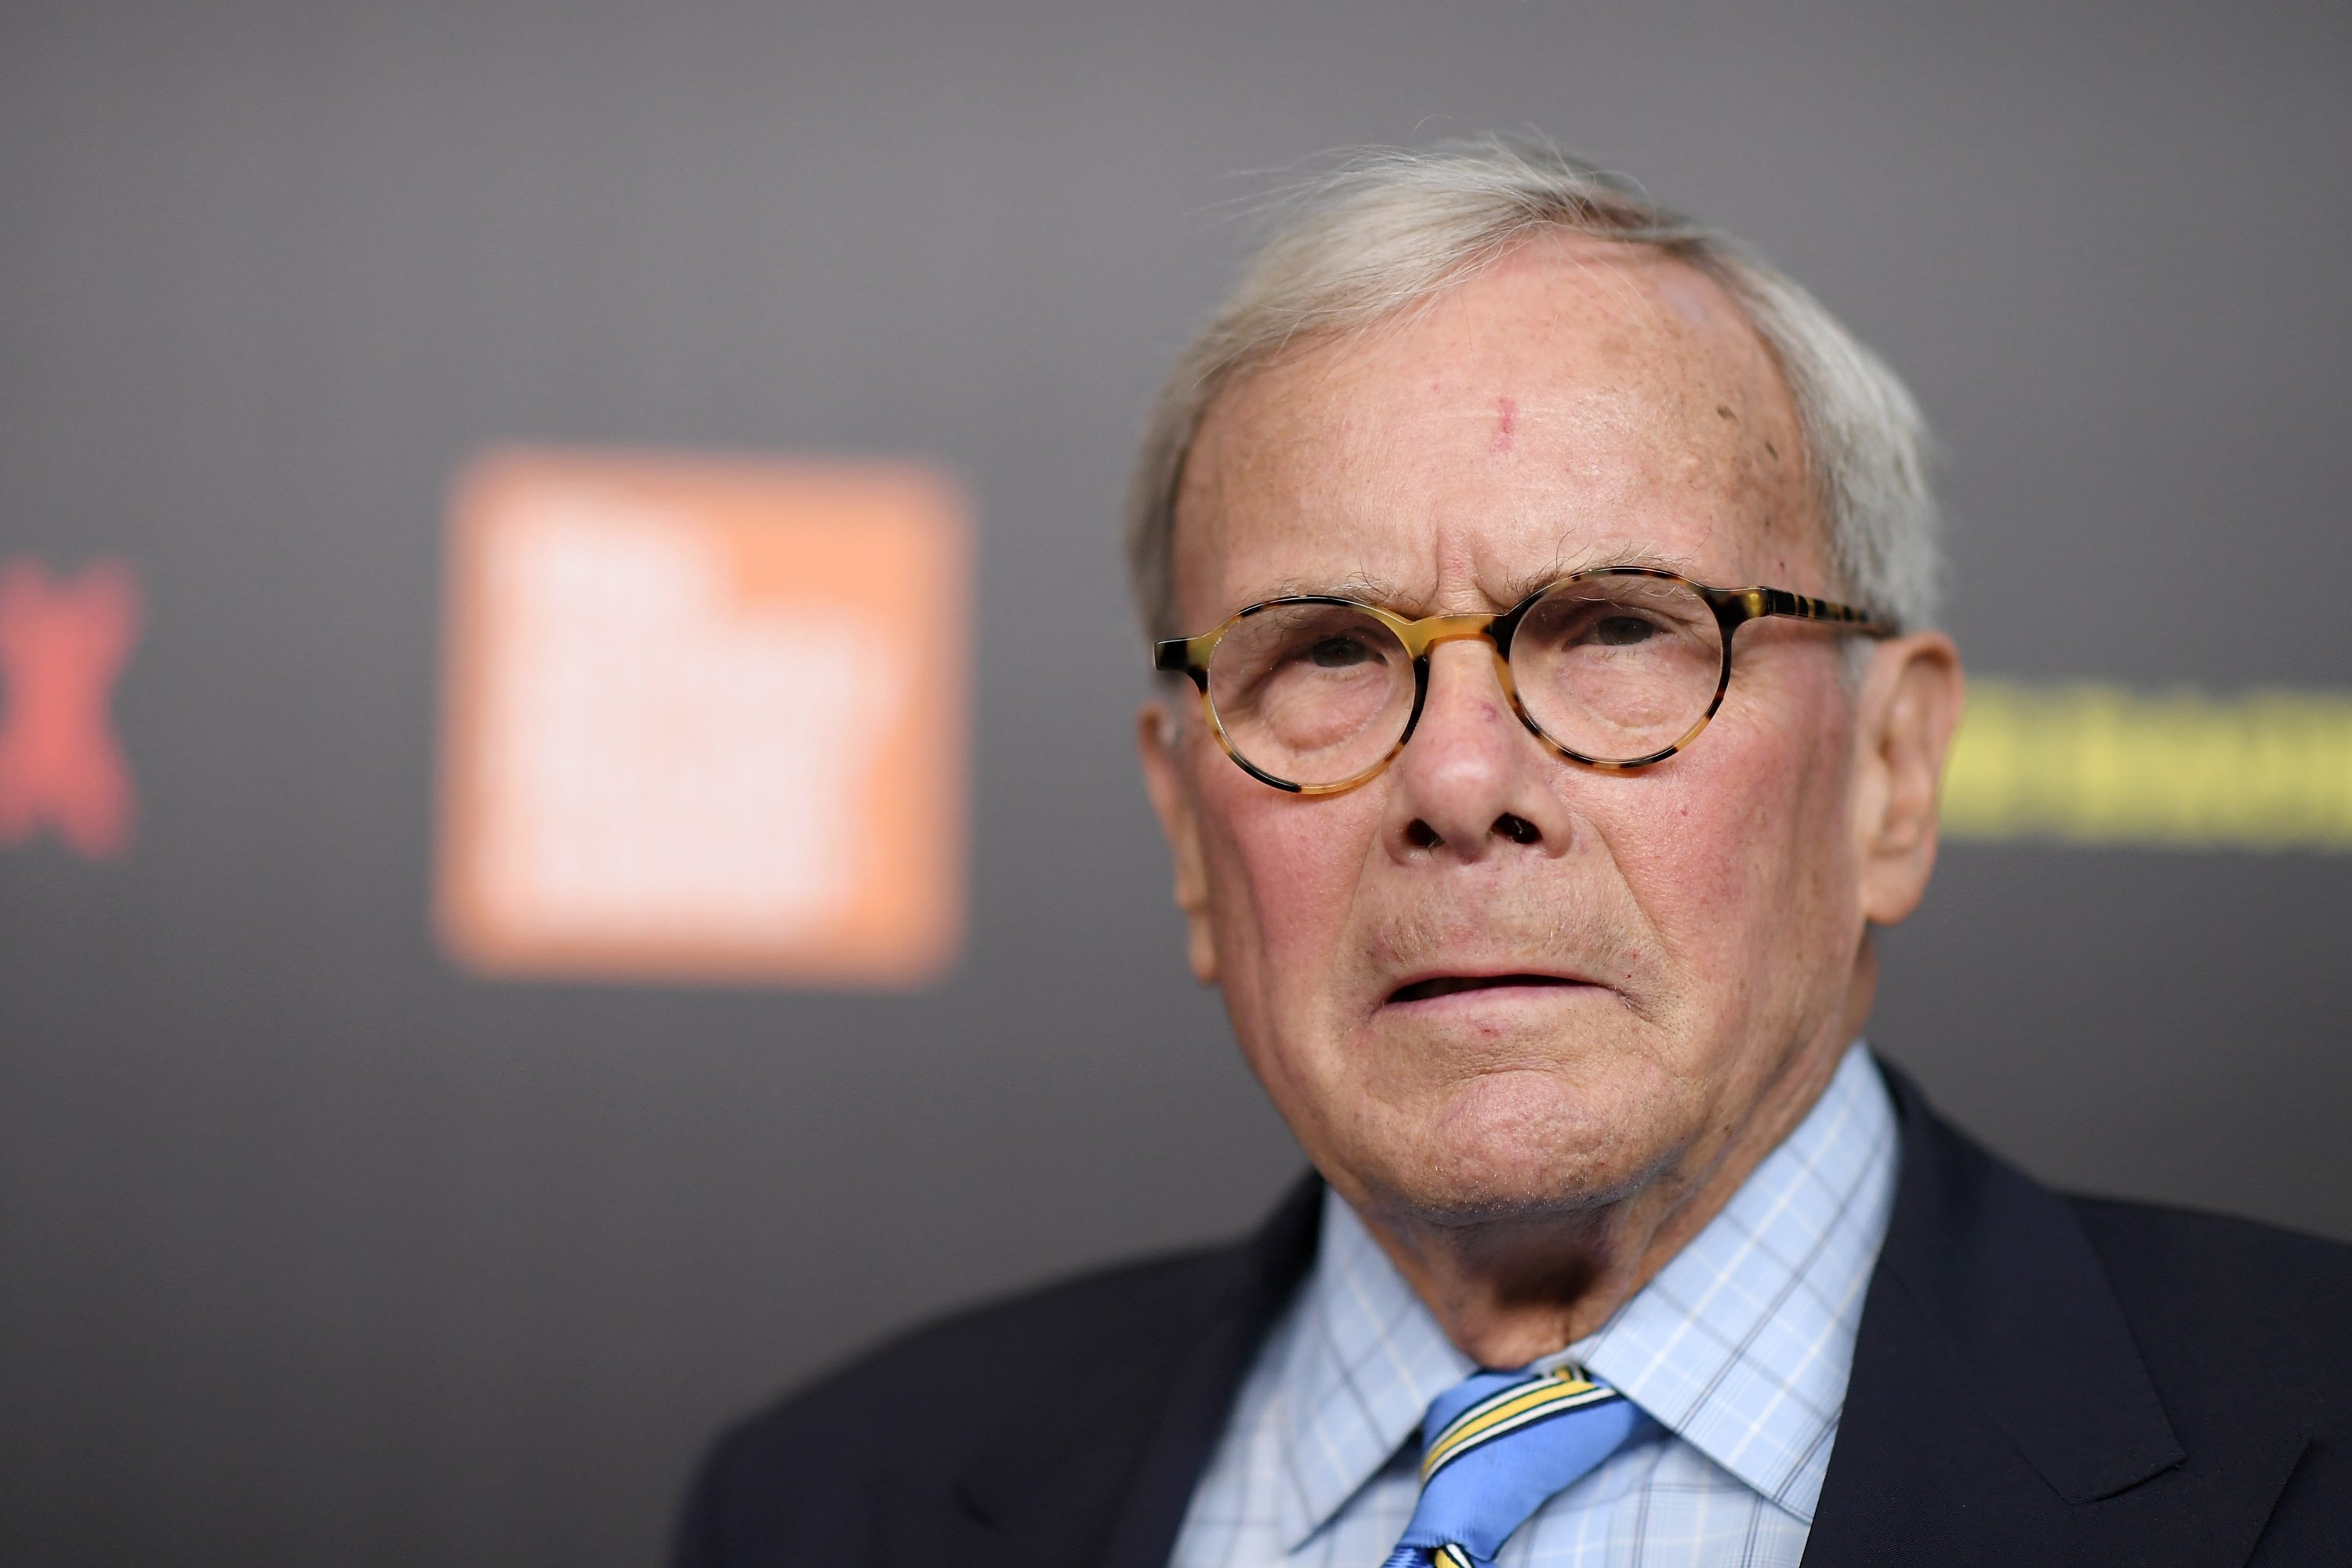 Tom Brokaw at the "Five Came Back" world premiere at Alice Tully Hall at Lincoln Center on March 27, 2017, in New York City | Source: Getty Images